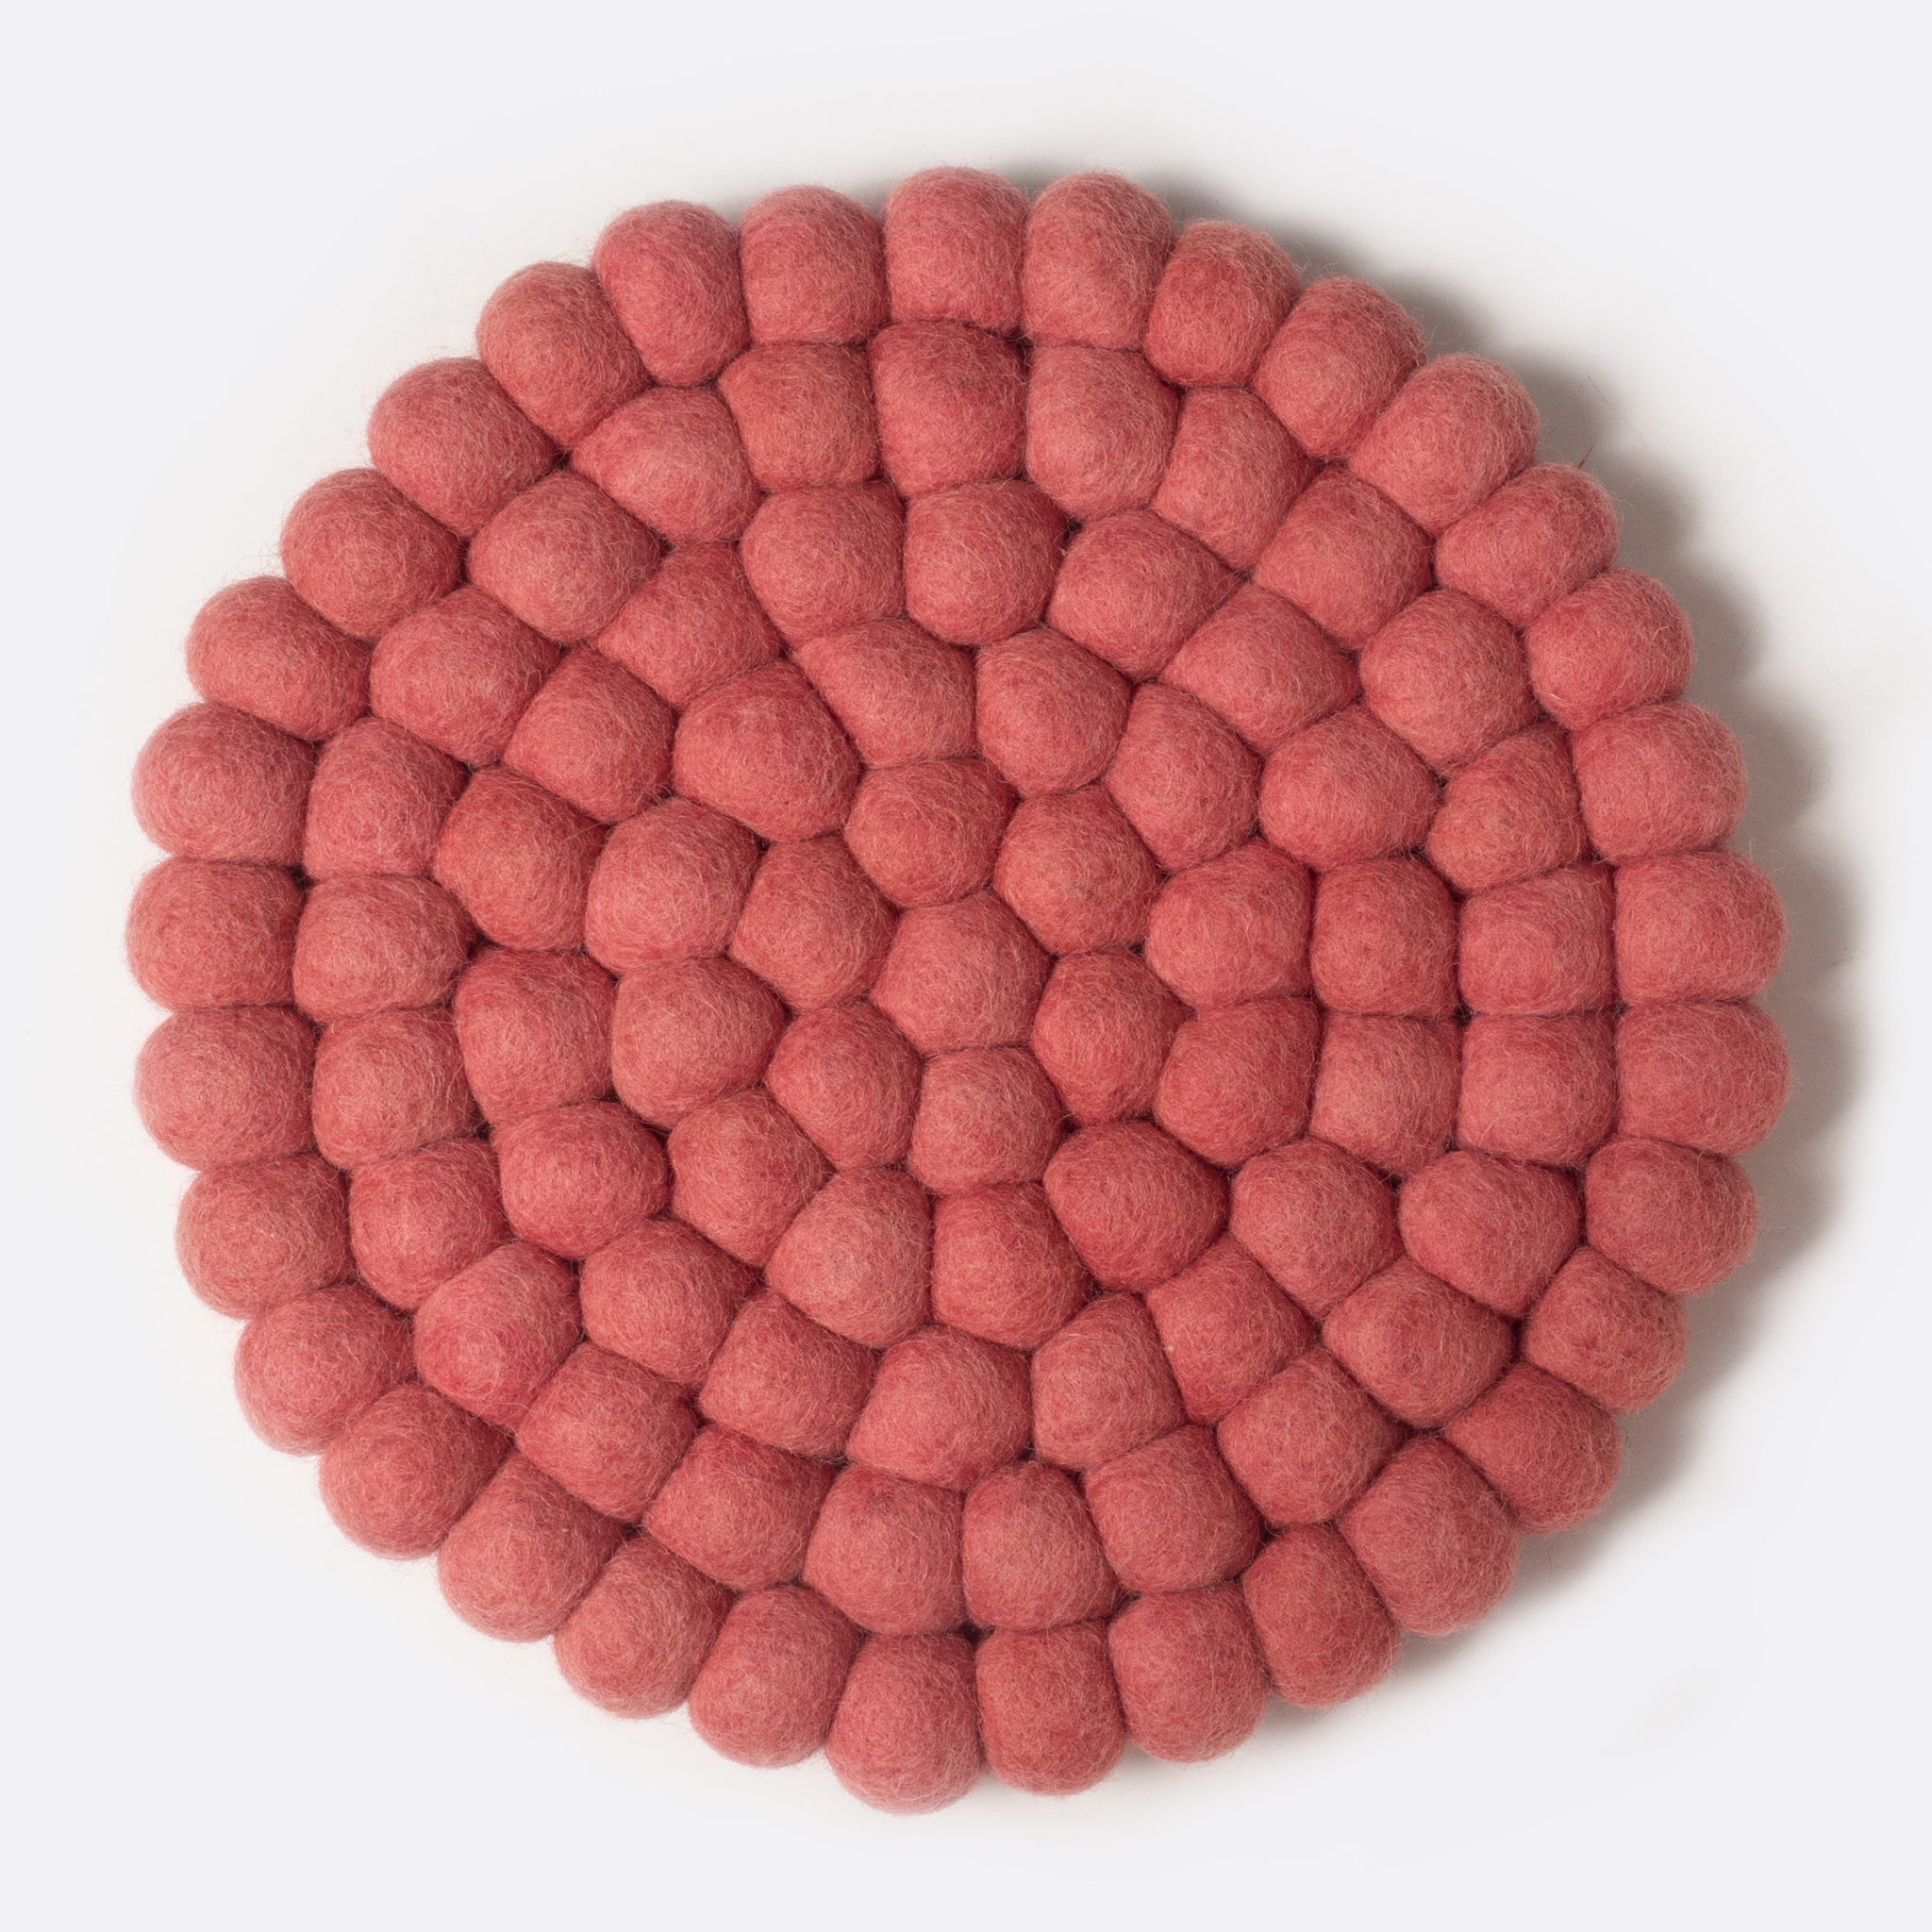 Round felt coaster which is made from little felt balls. The color is rose.